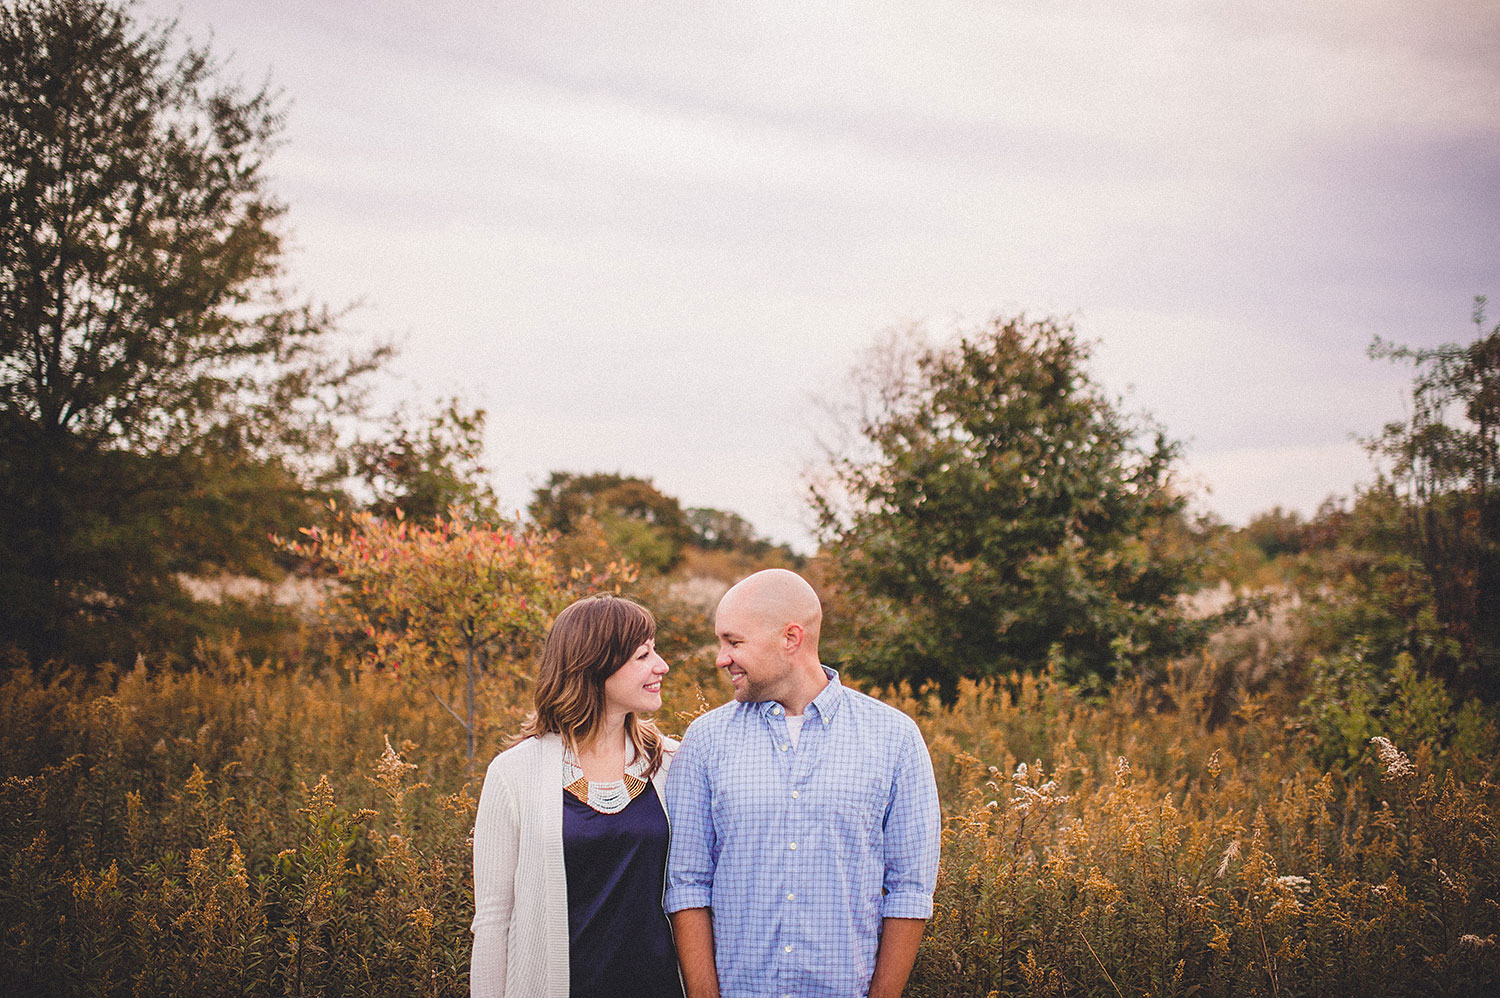 pat-robinson-photography-wilmington-engagement-session-21-2.jpg